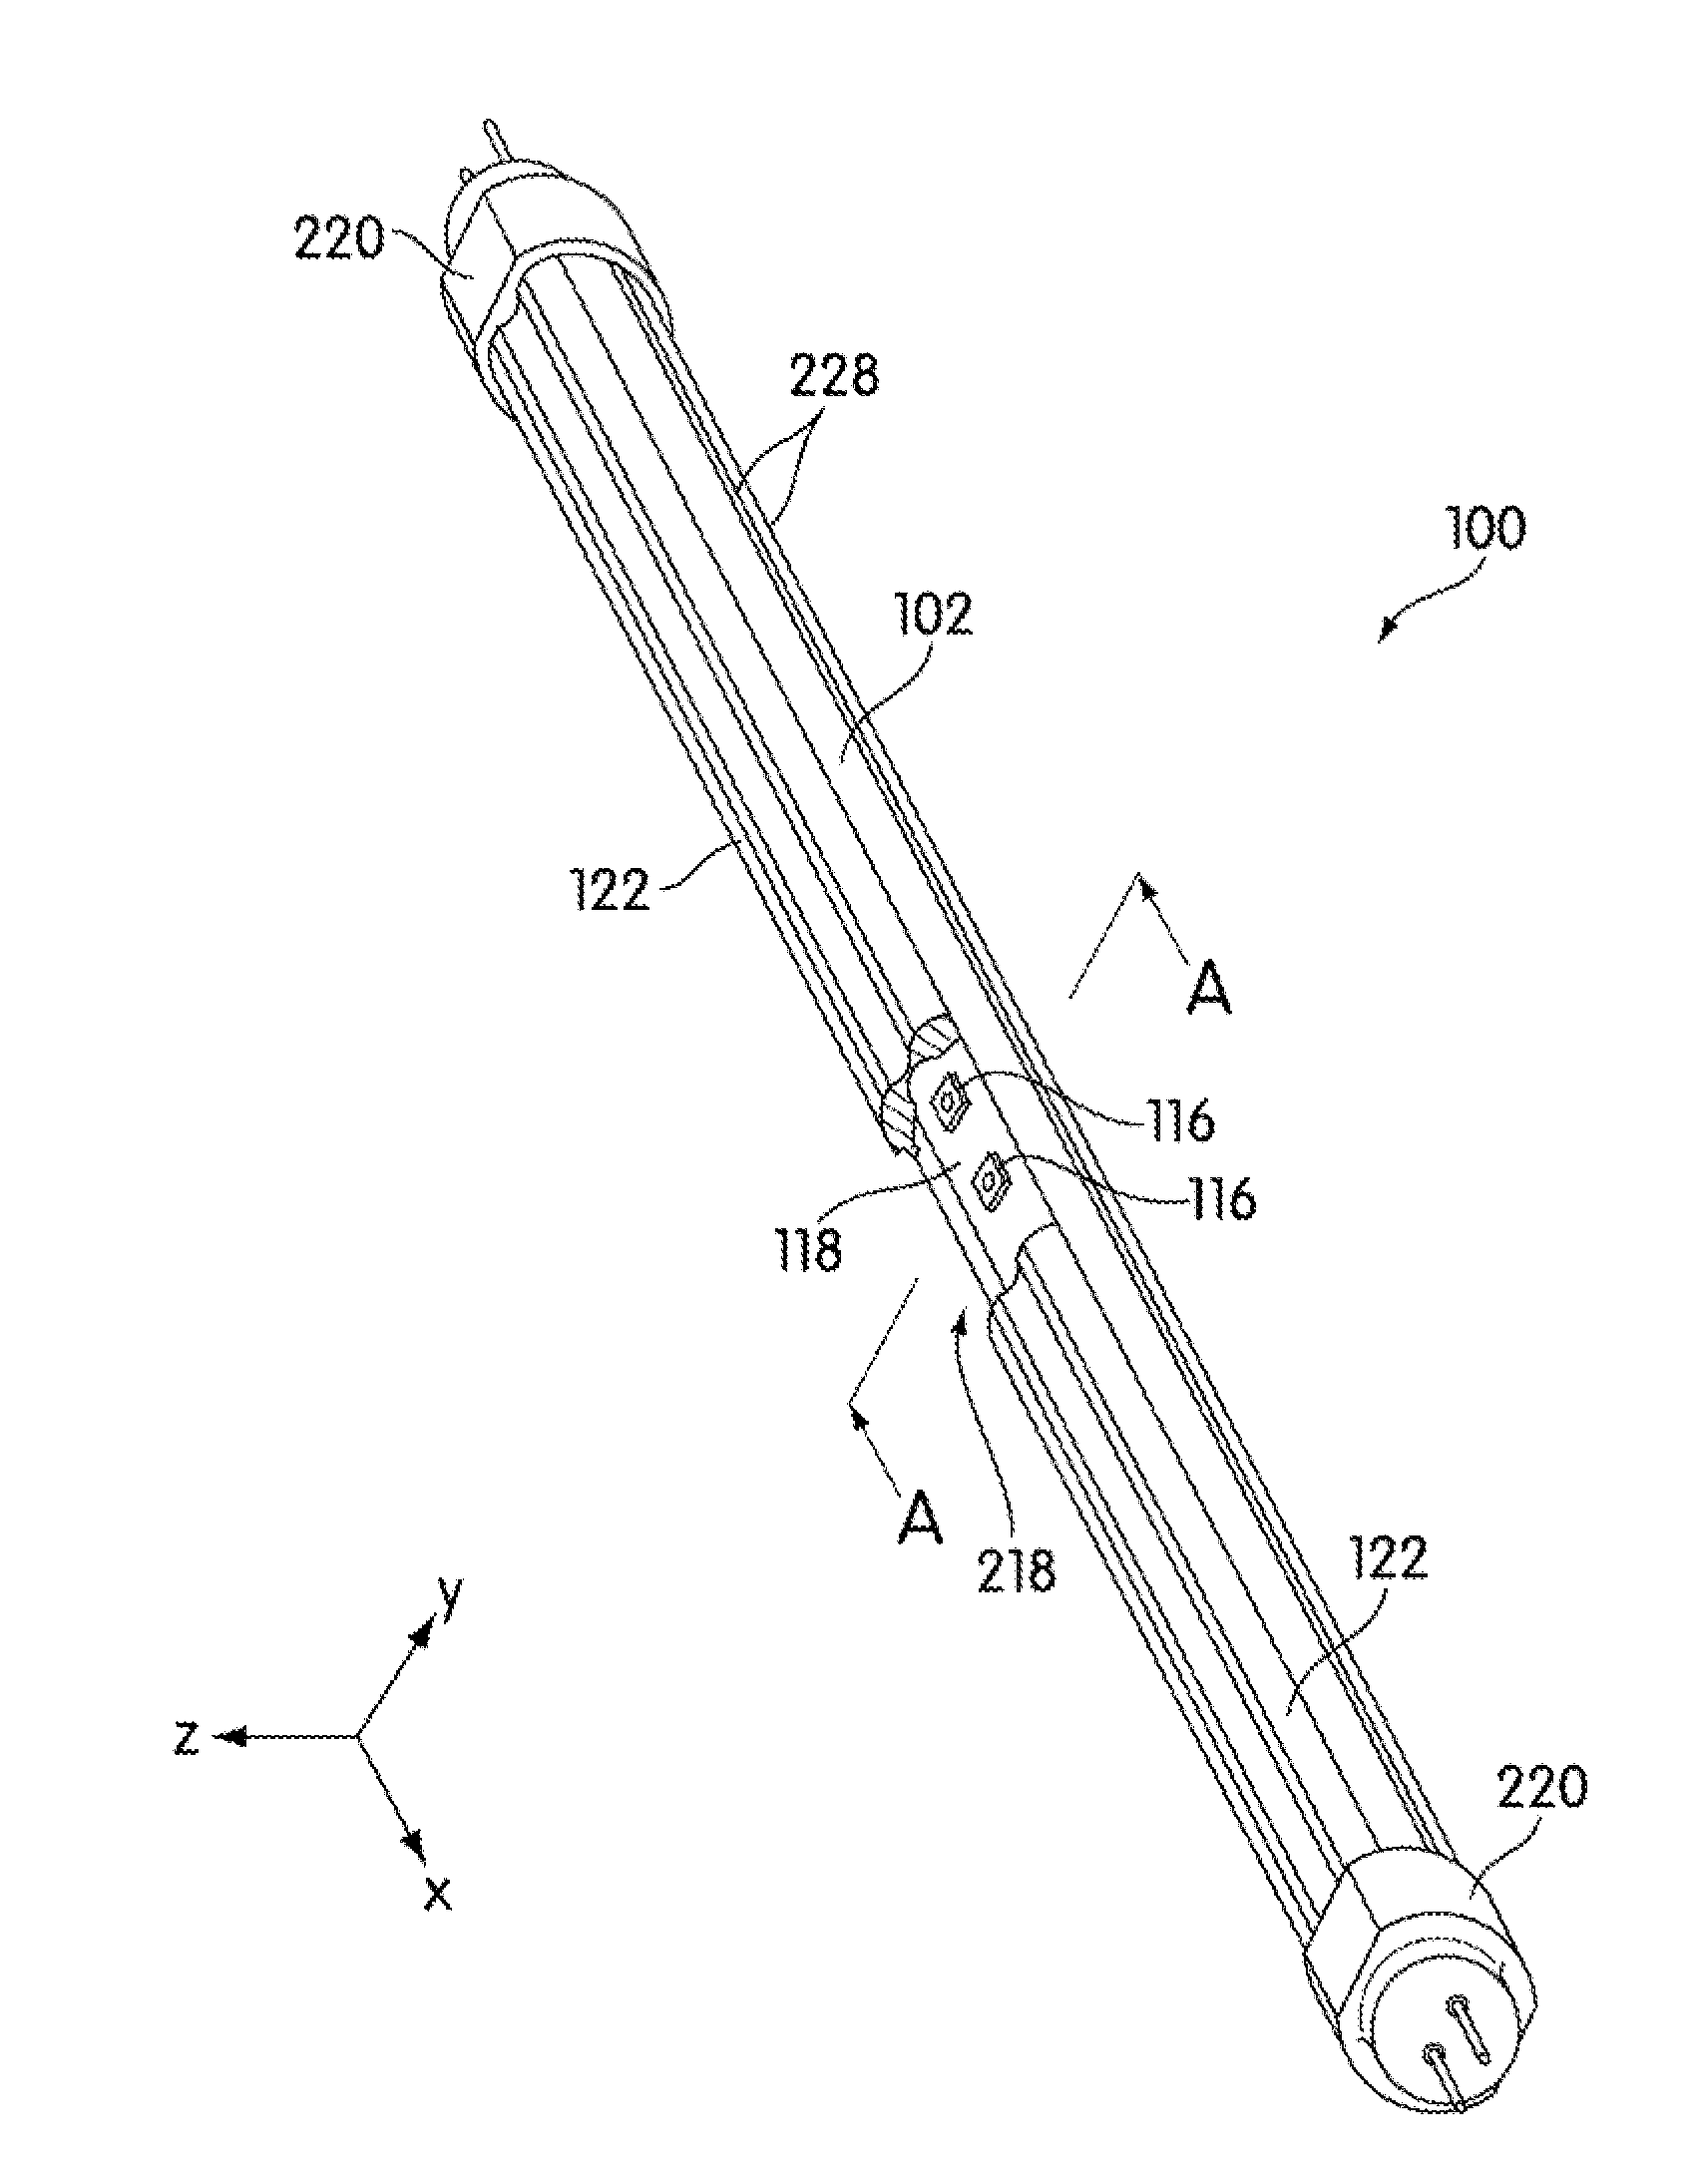 Light emitting diode based linear lamps